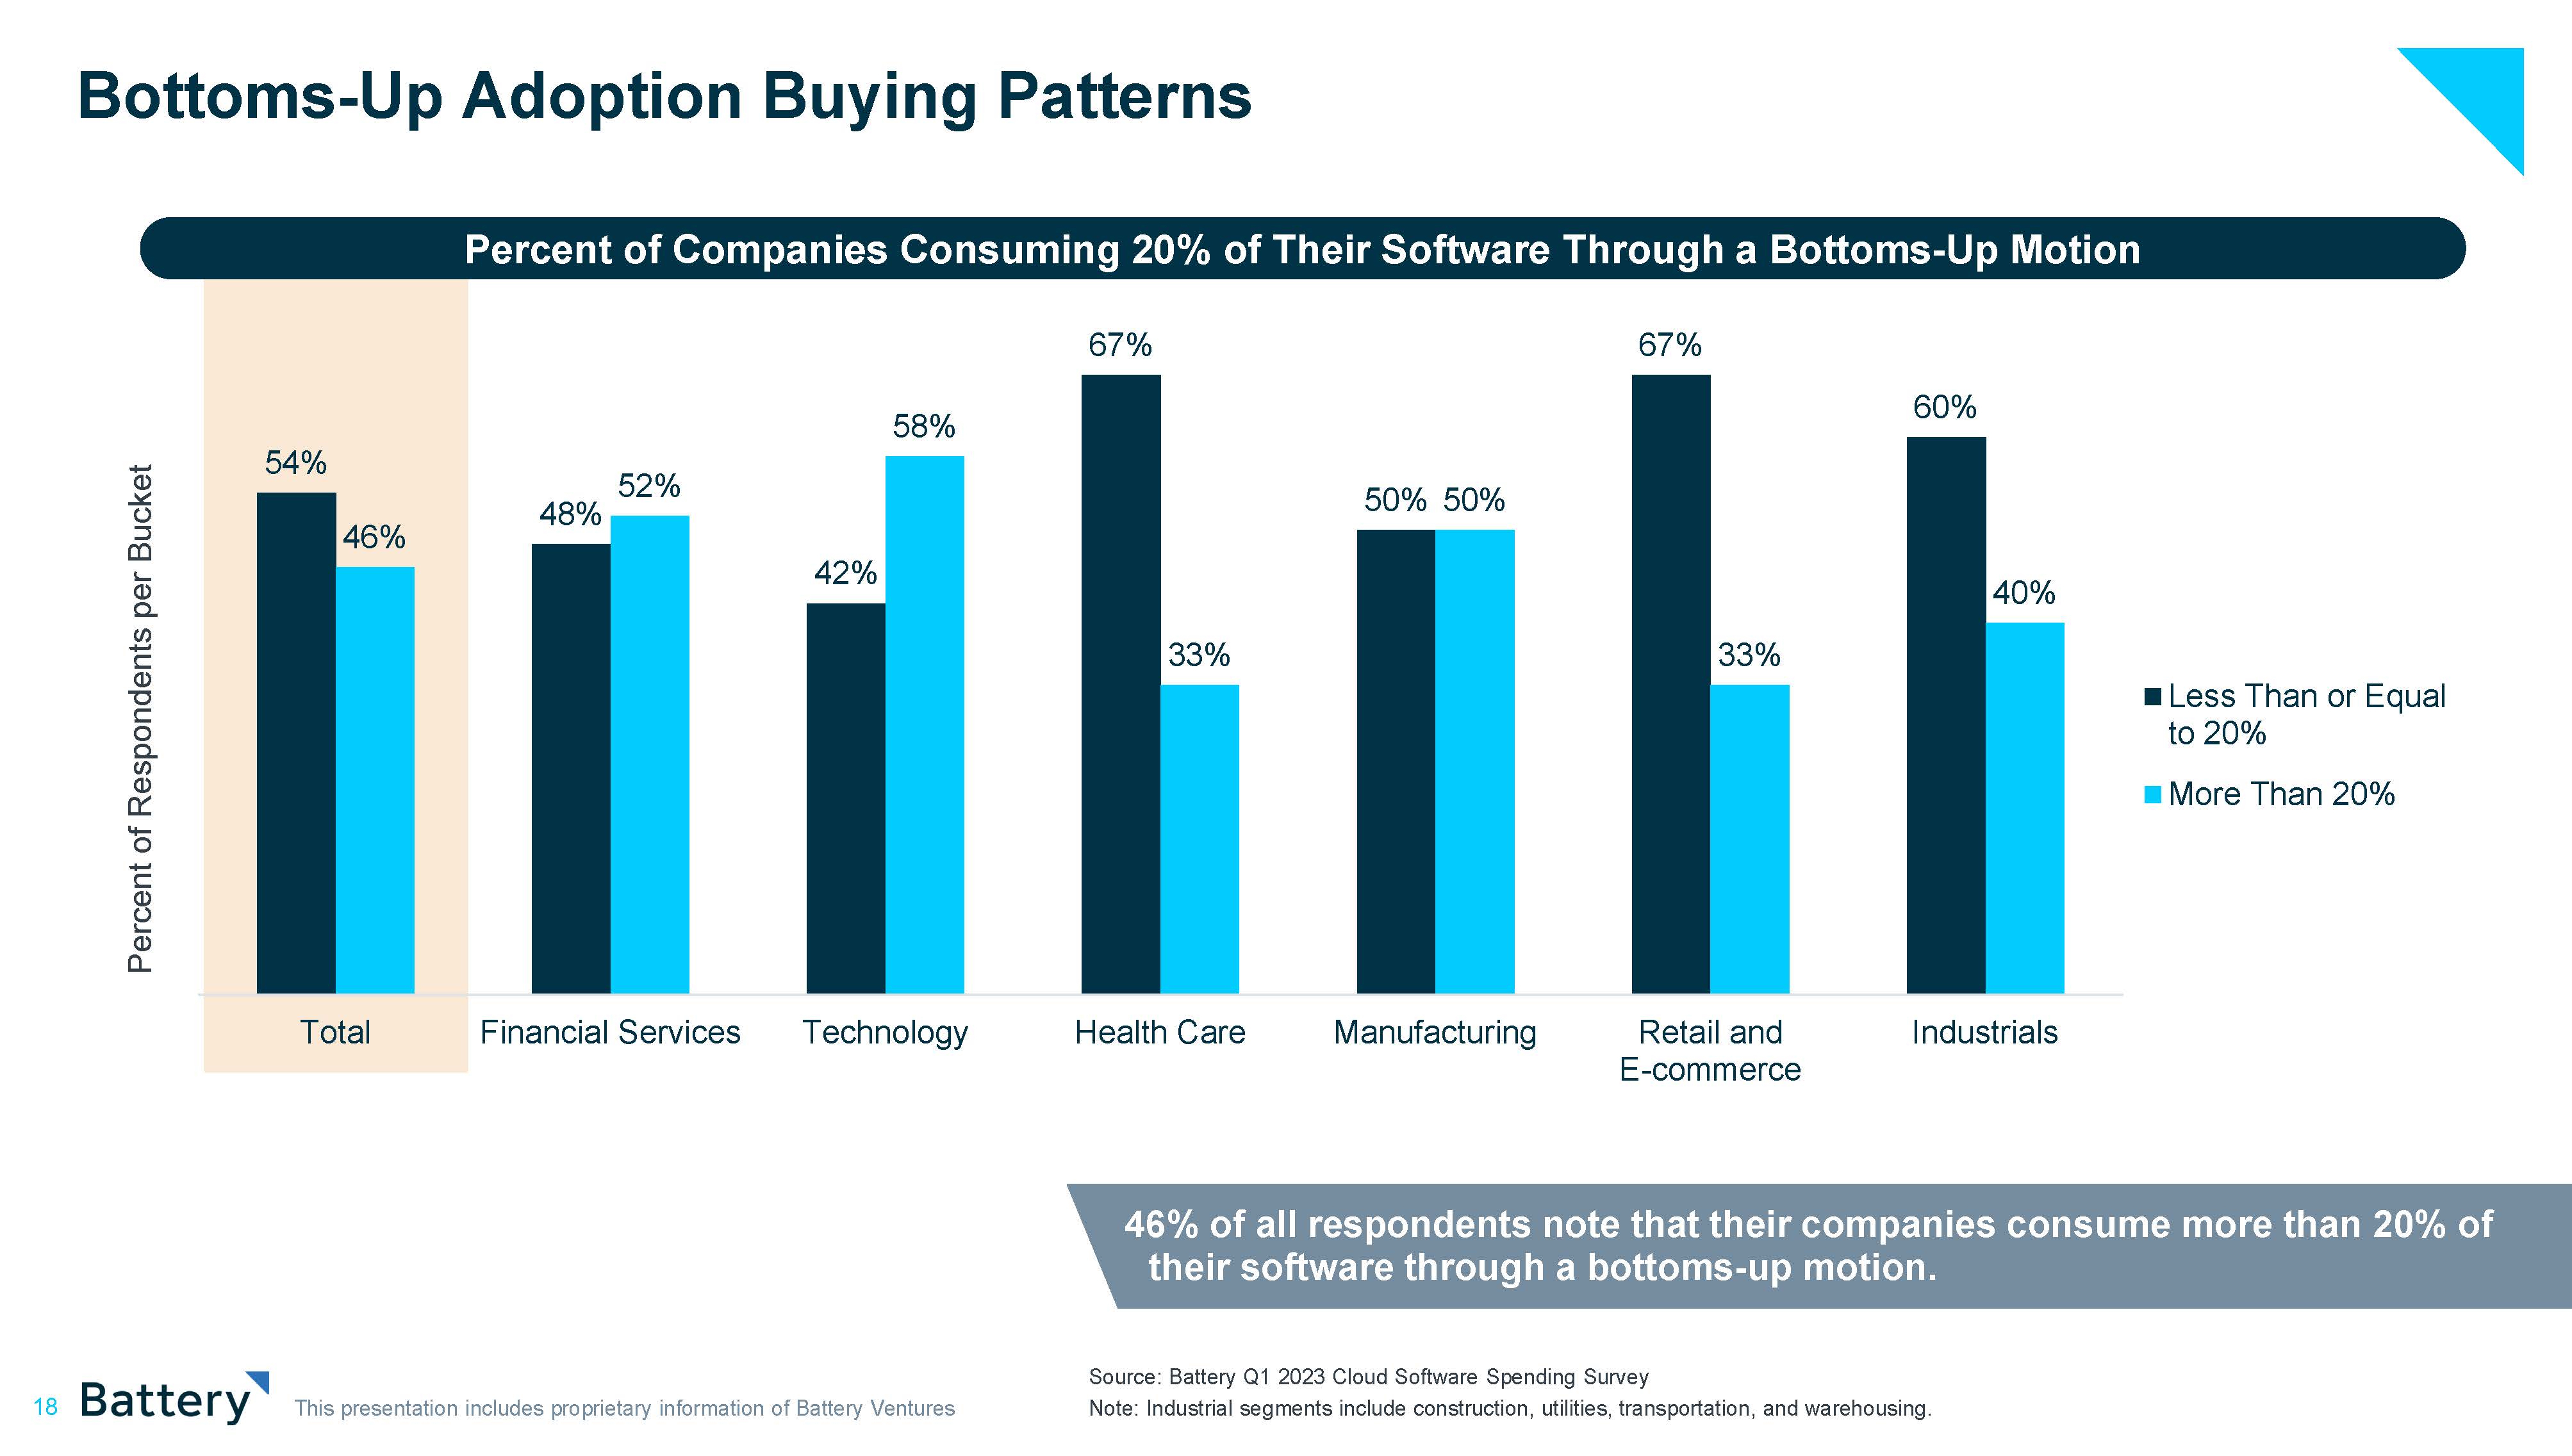 Have enterprise buyers finally soured on ‘bottoms-up’ tech sales?